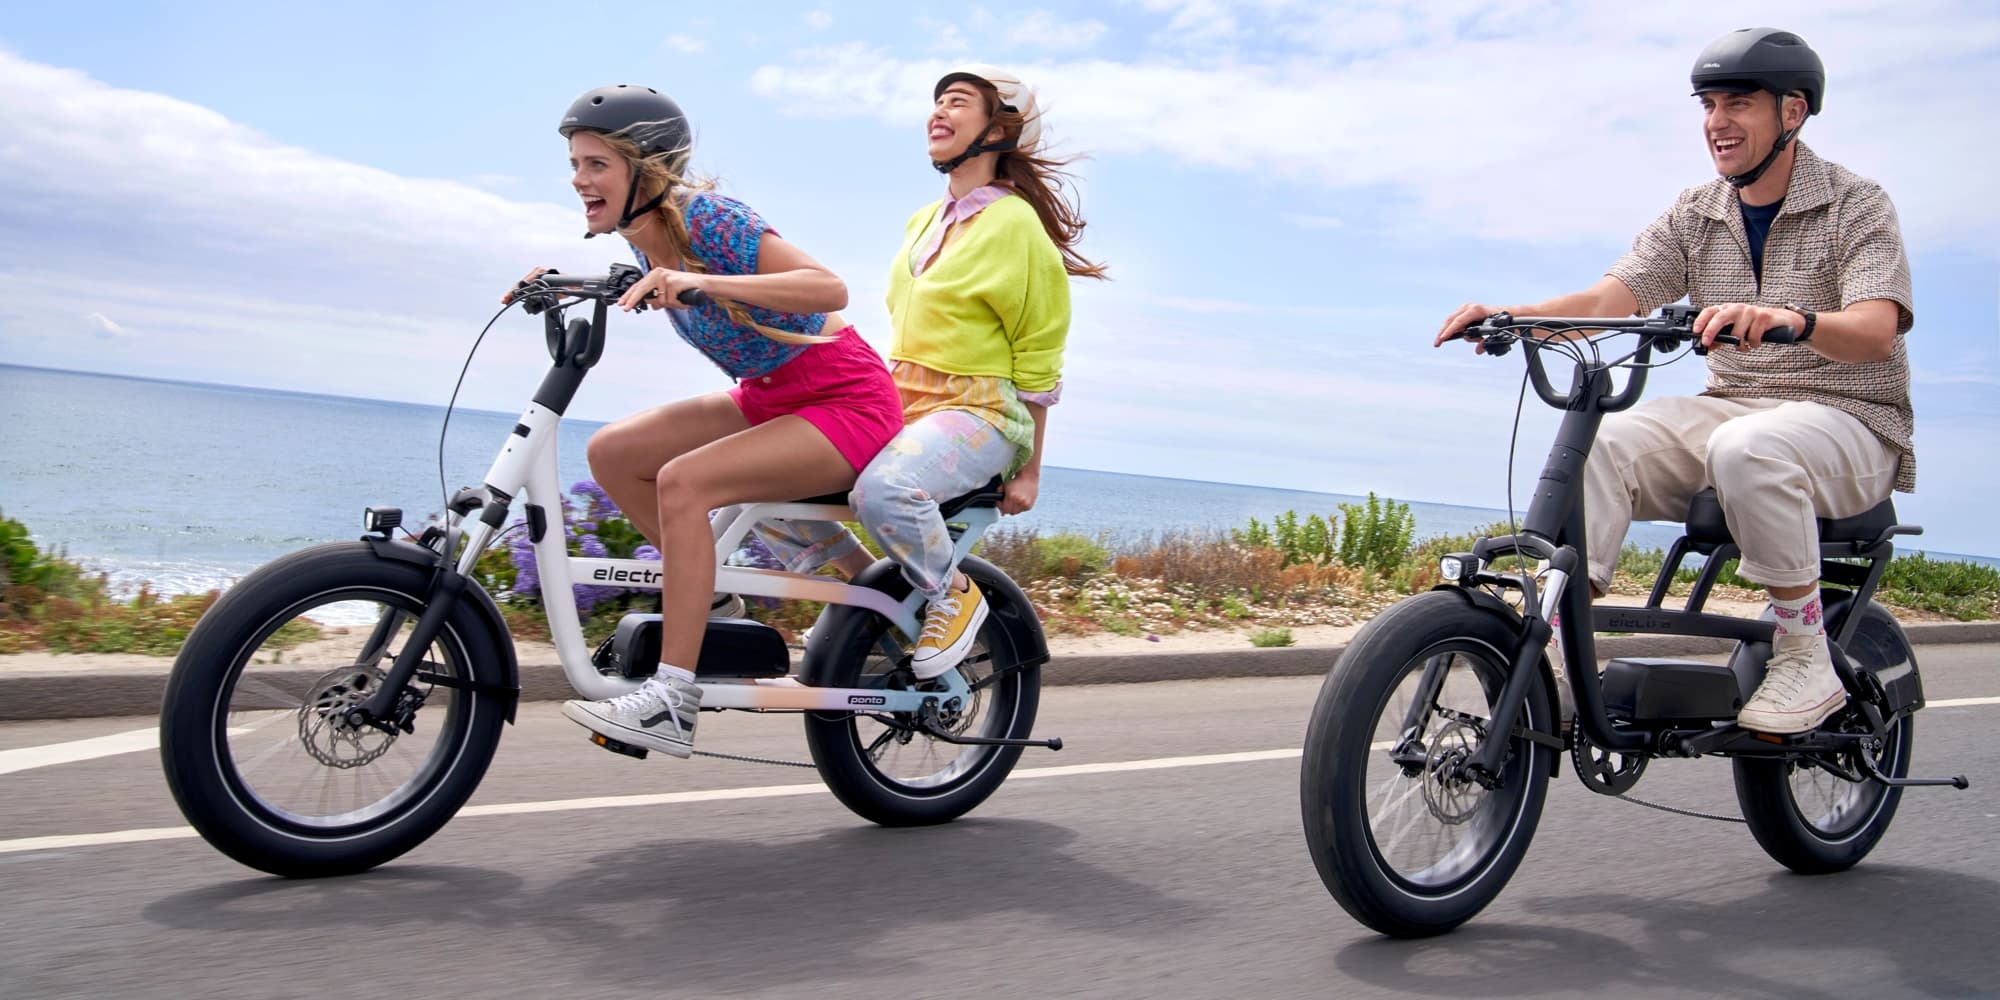 Trek launches its first throttle-controlled moped-style electric bike